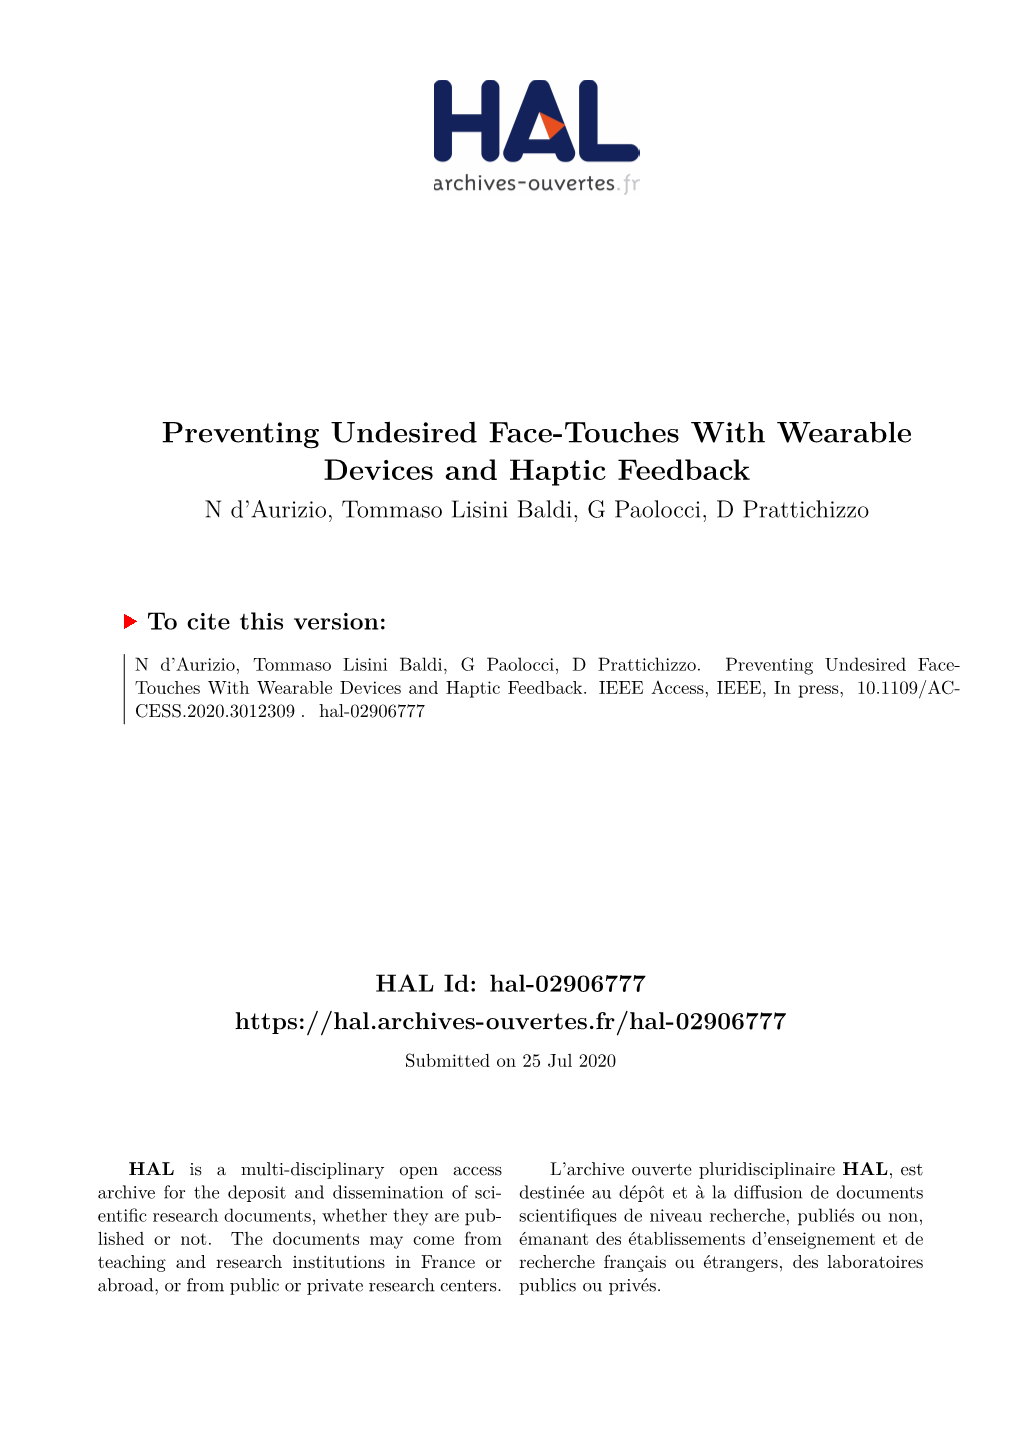 Preventing Undesired Face-Touches with Wearable Devices and Haptic Feedback N D’Aurizio, Tommaso Lisini Baldi, G Paolocci, D Prattichizzo